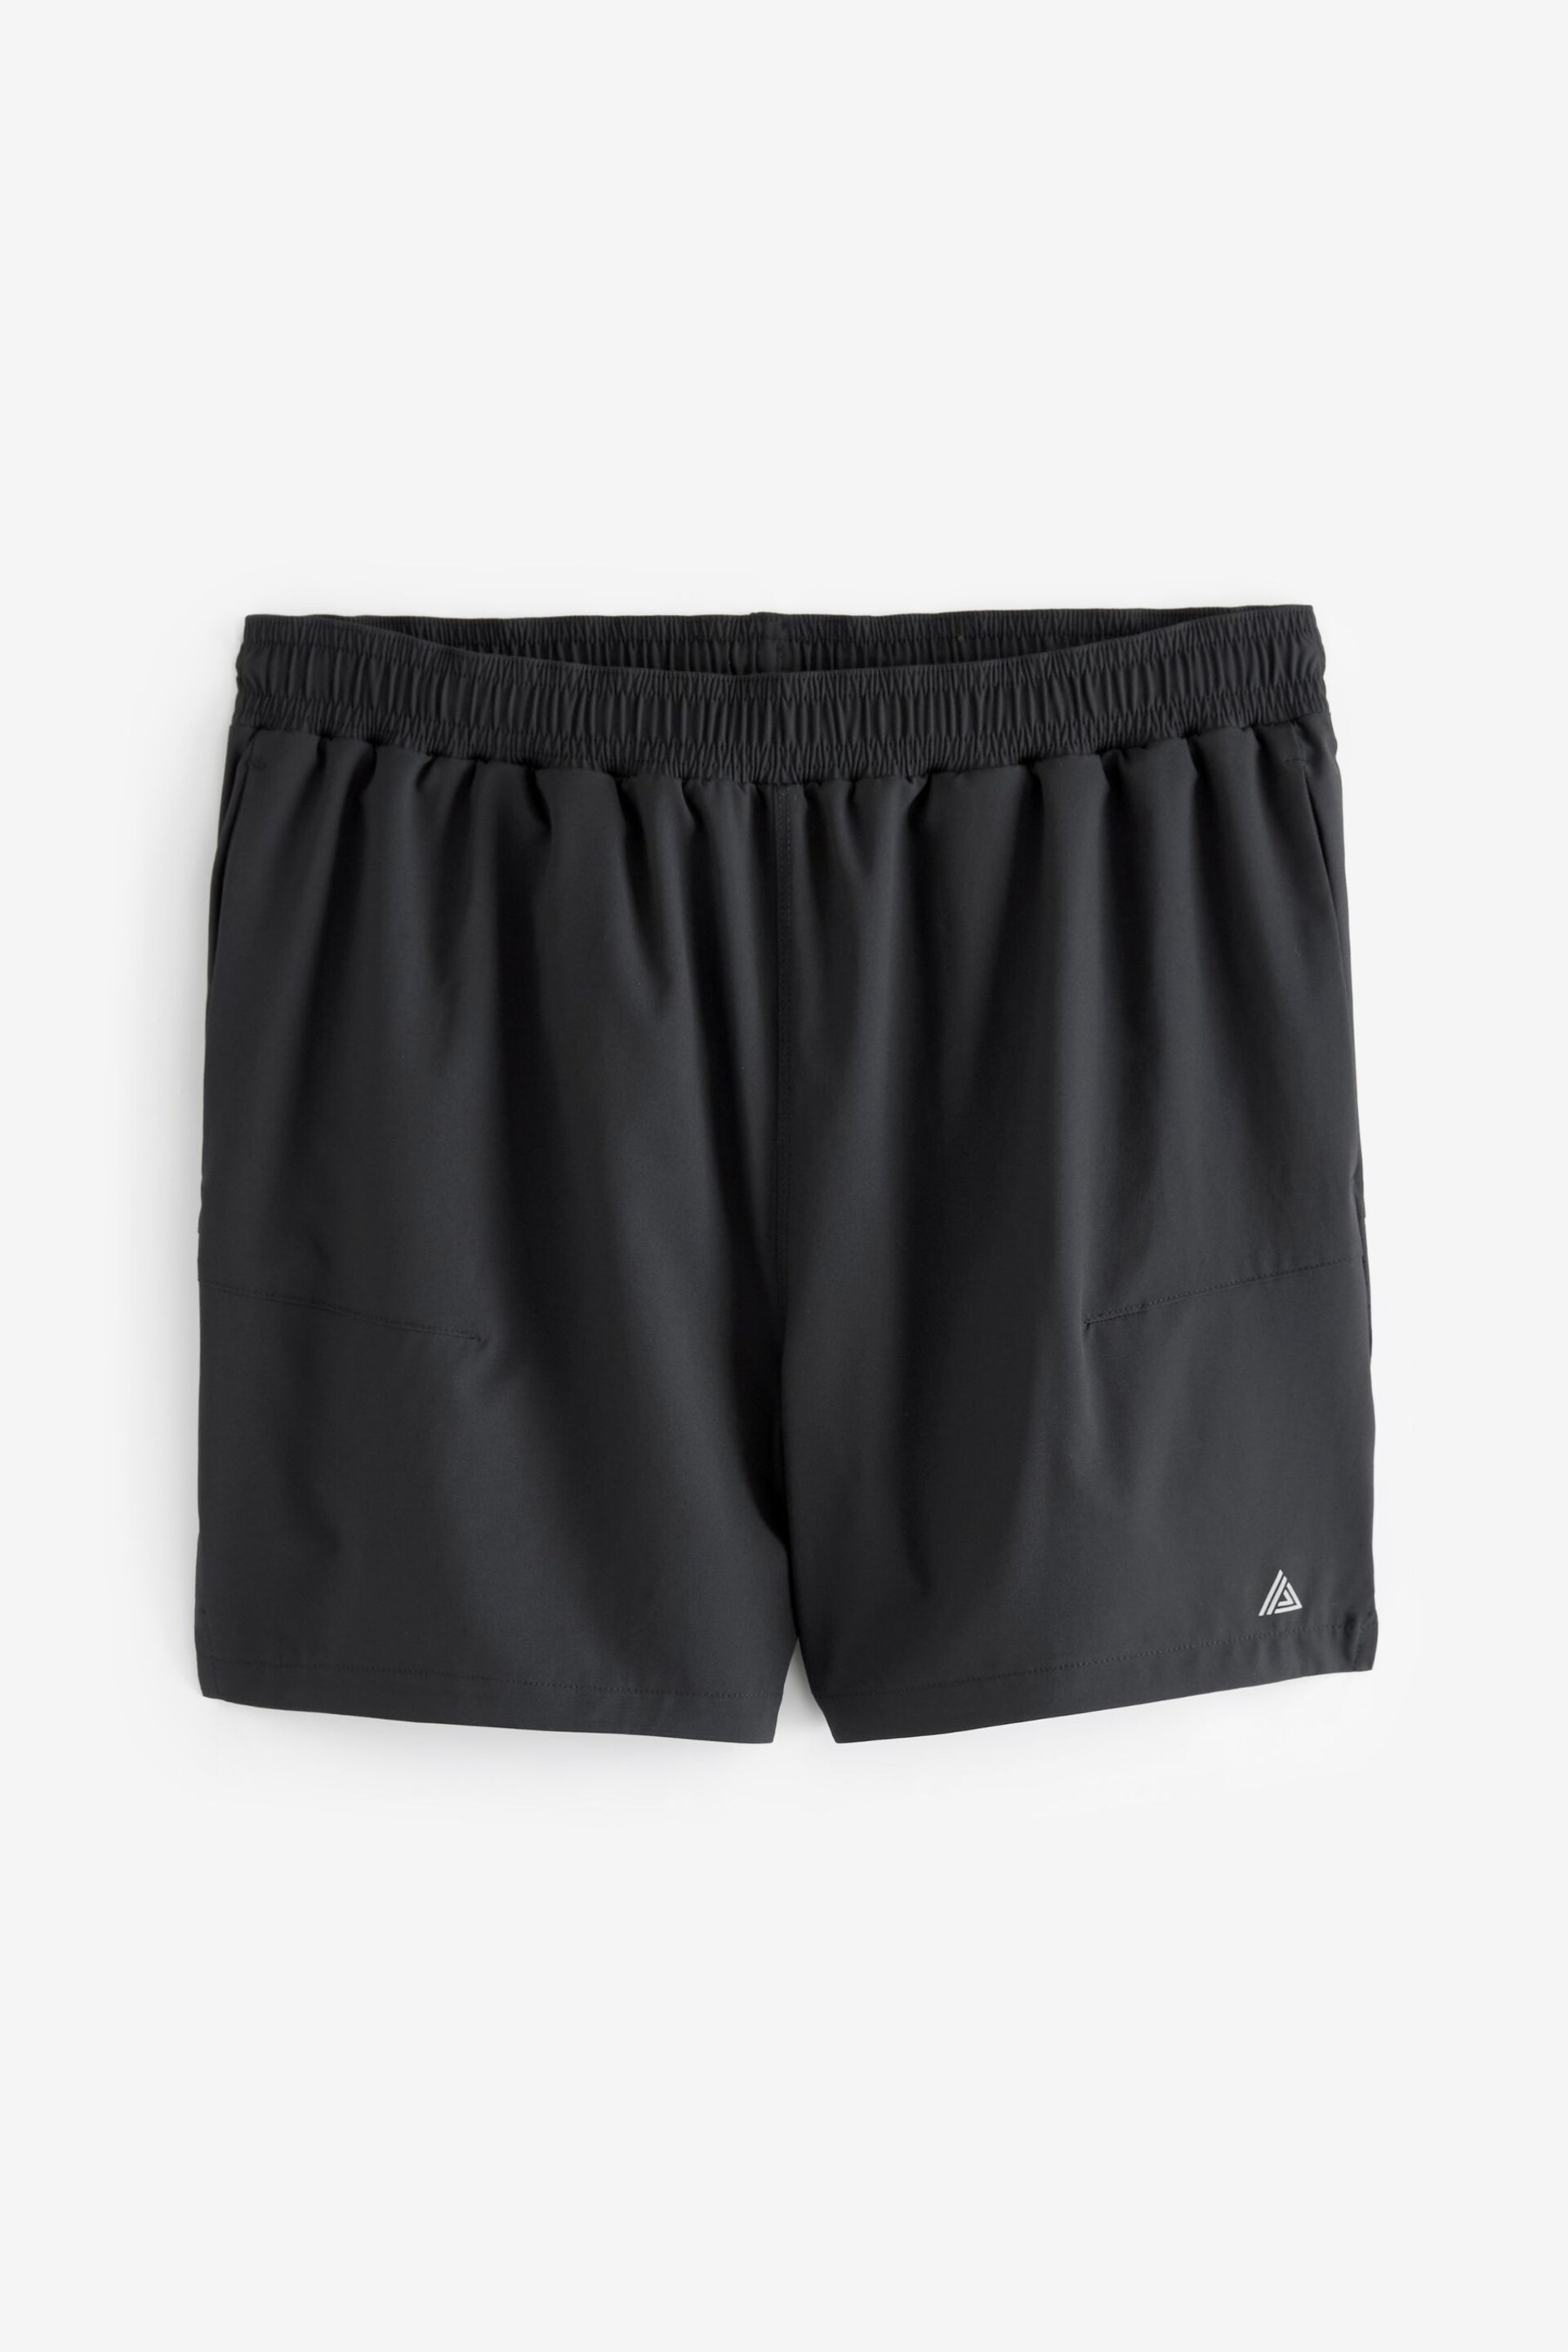 Black 5 Inch Active Gym Sports Shorts - Image 4 of 7